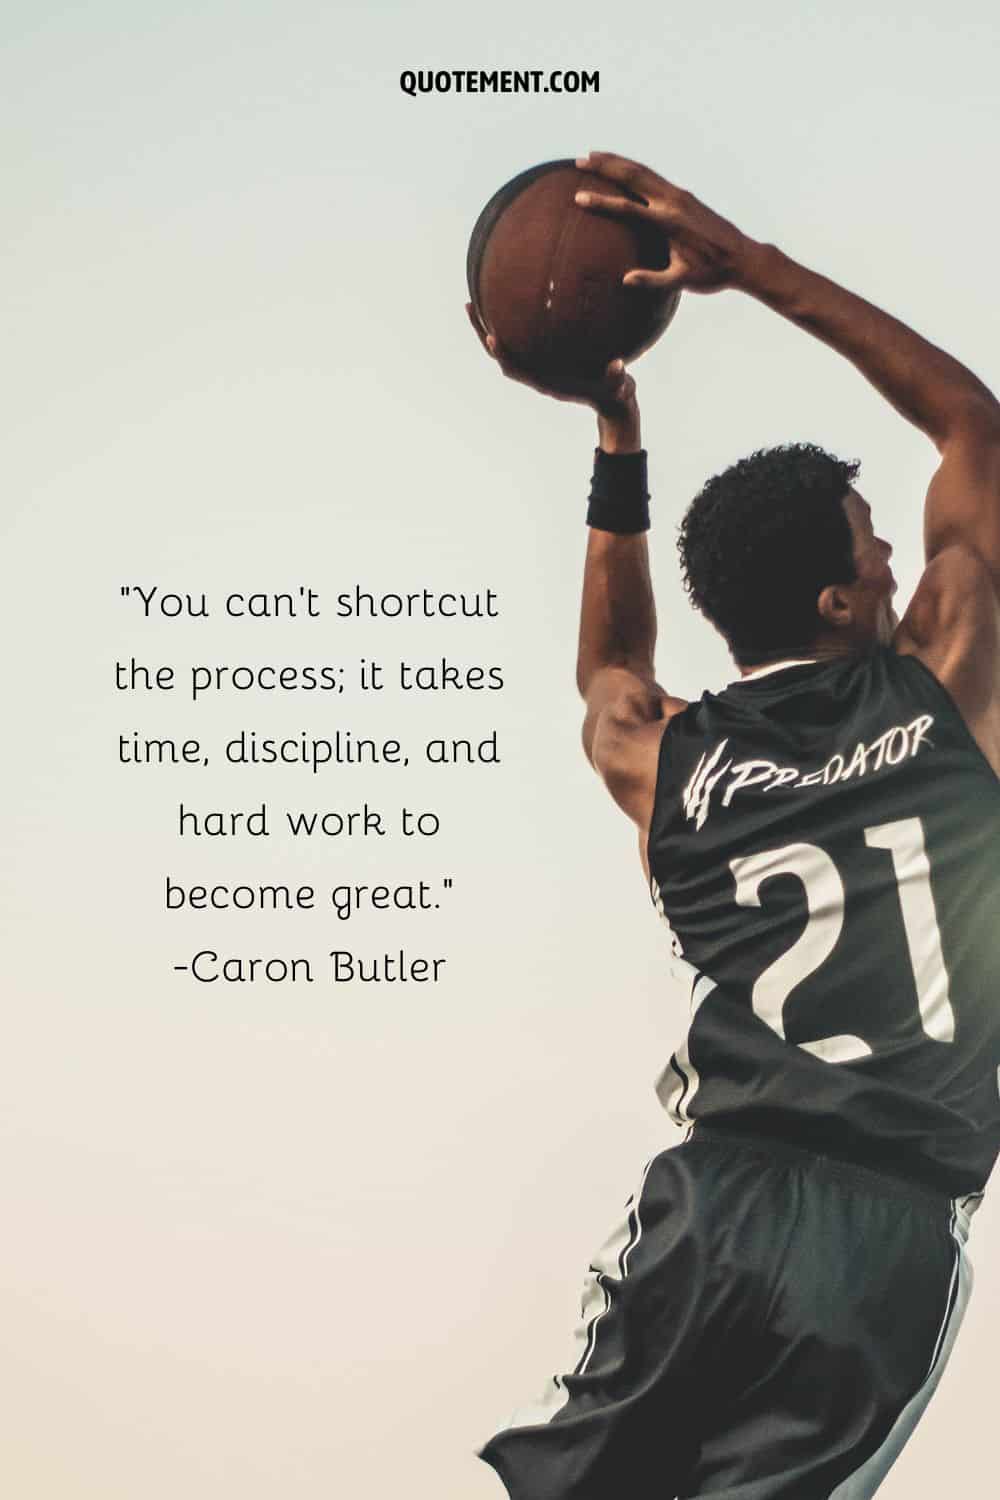 You can't shortcut the process; it takes time, discipline, and hard work to become great